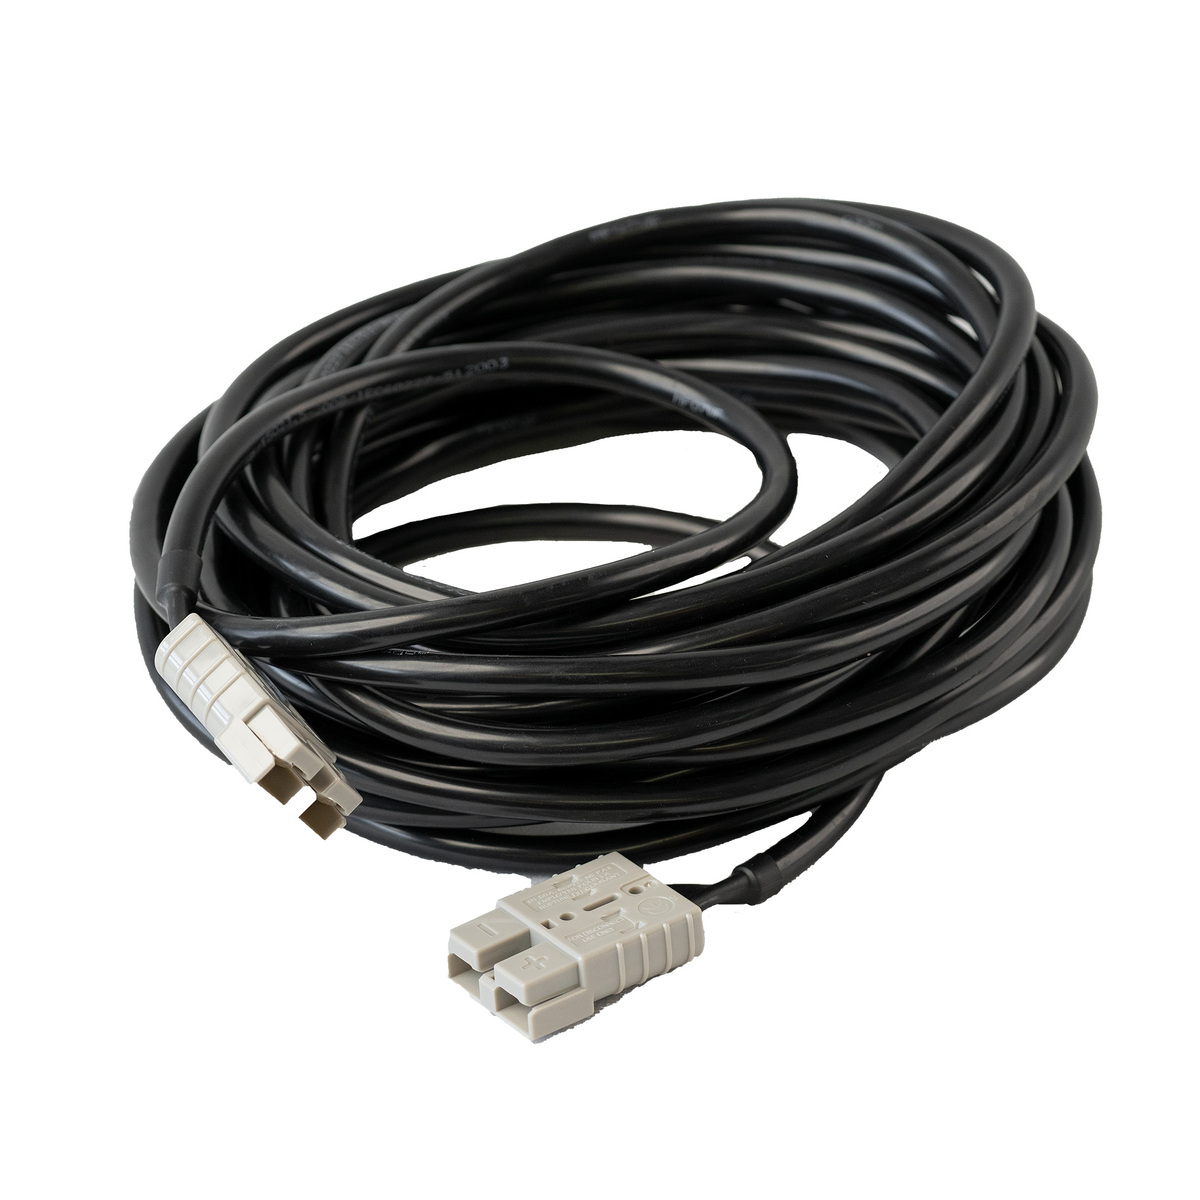 Hardkorr 10m Anderson Extension Cable